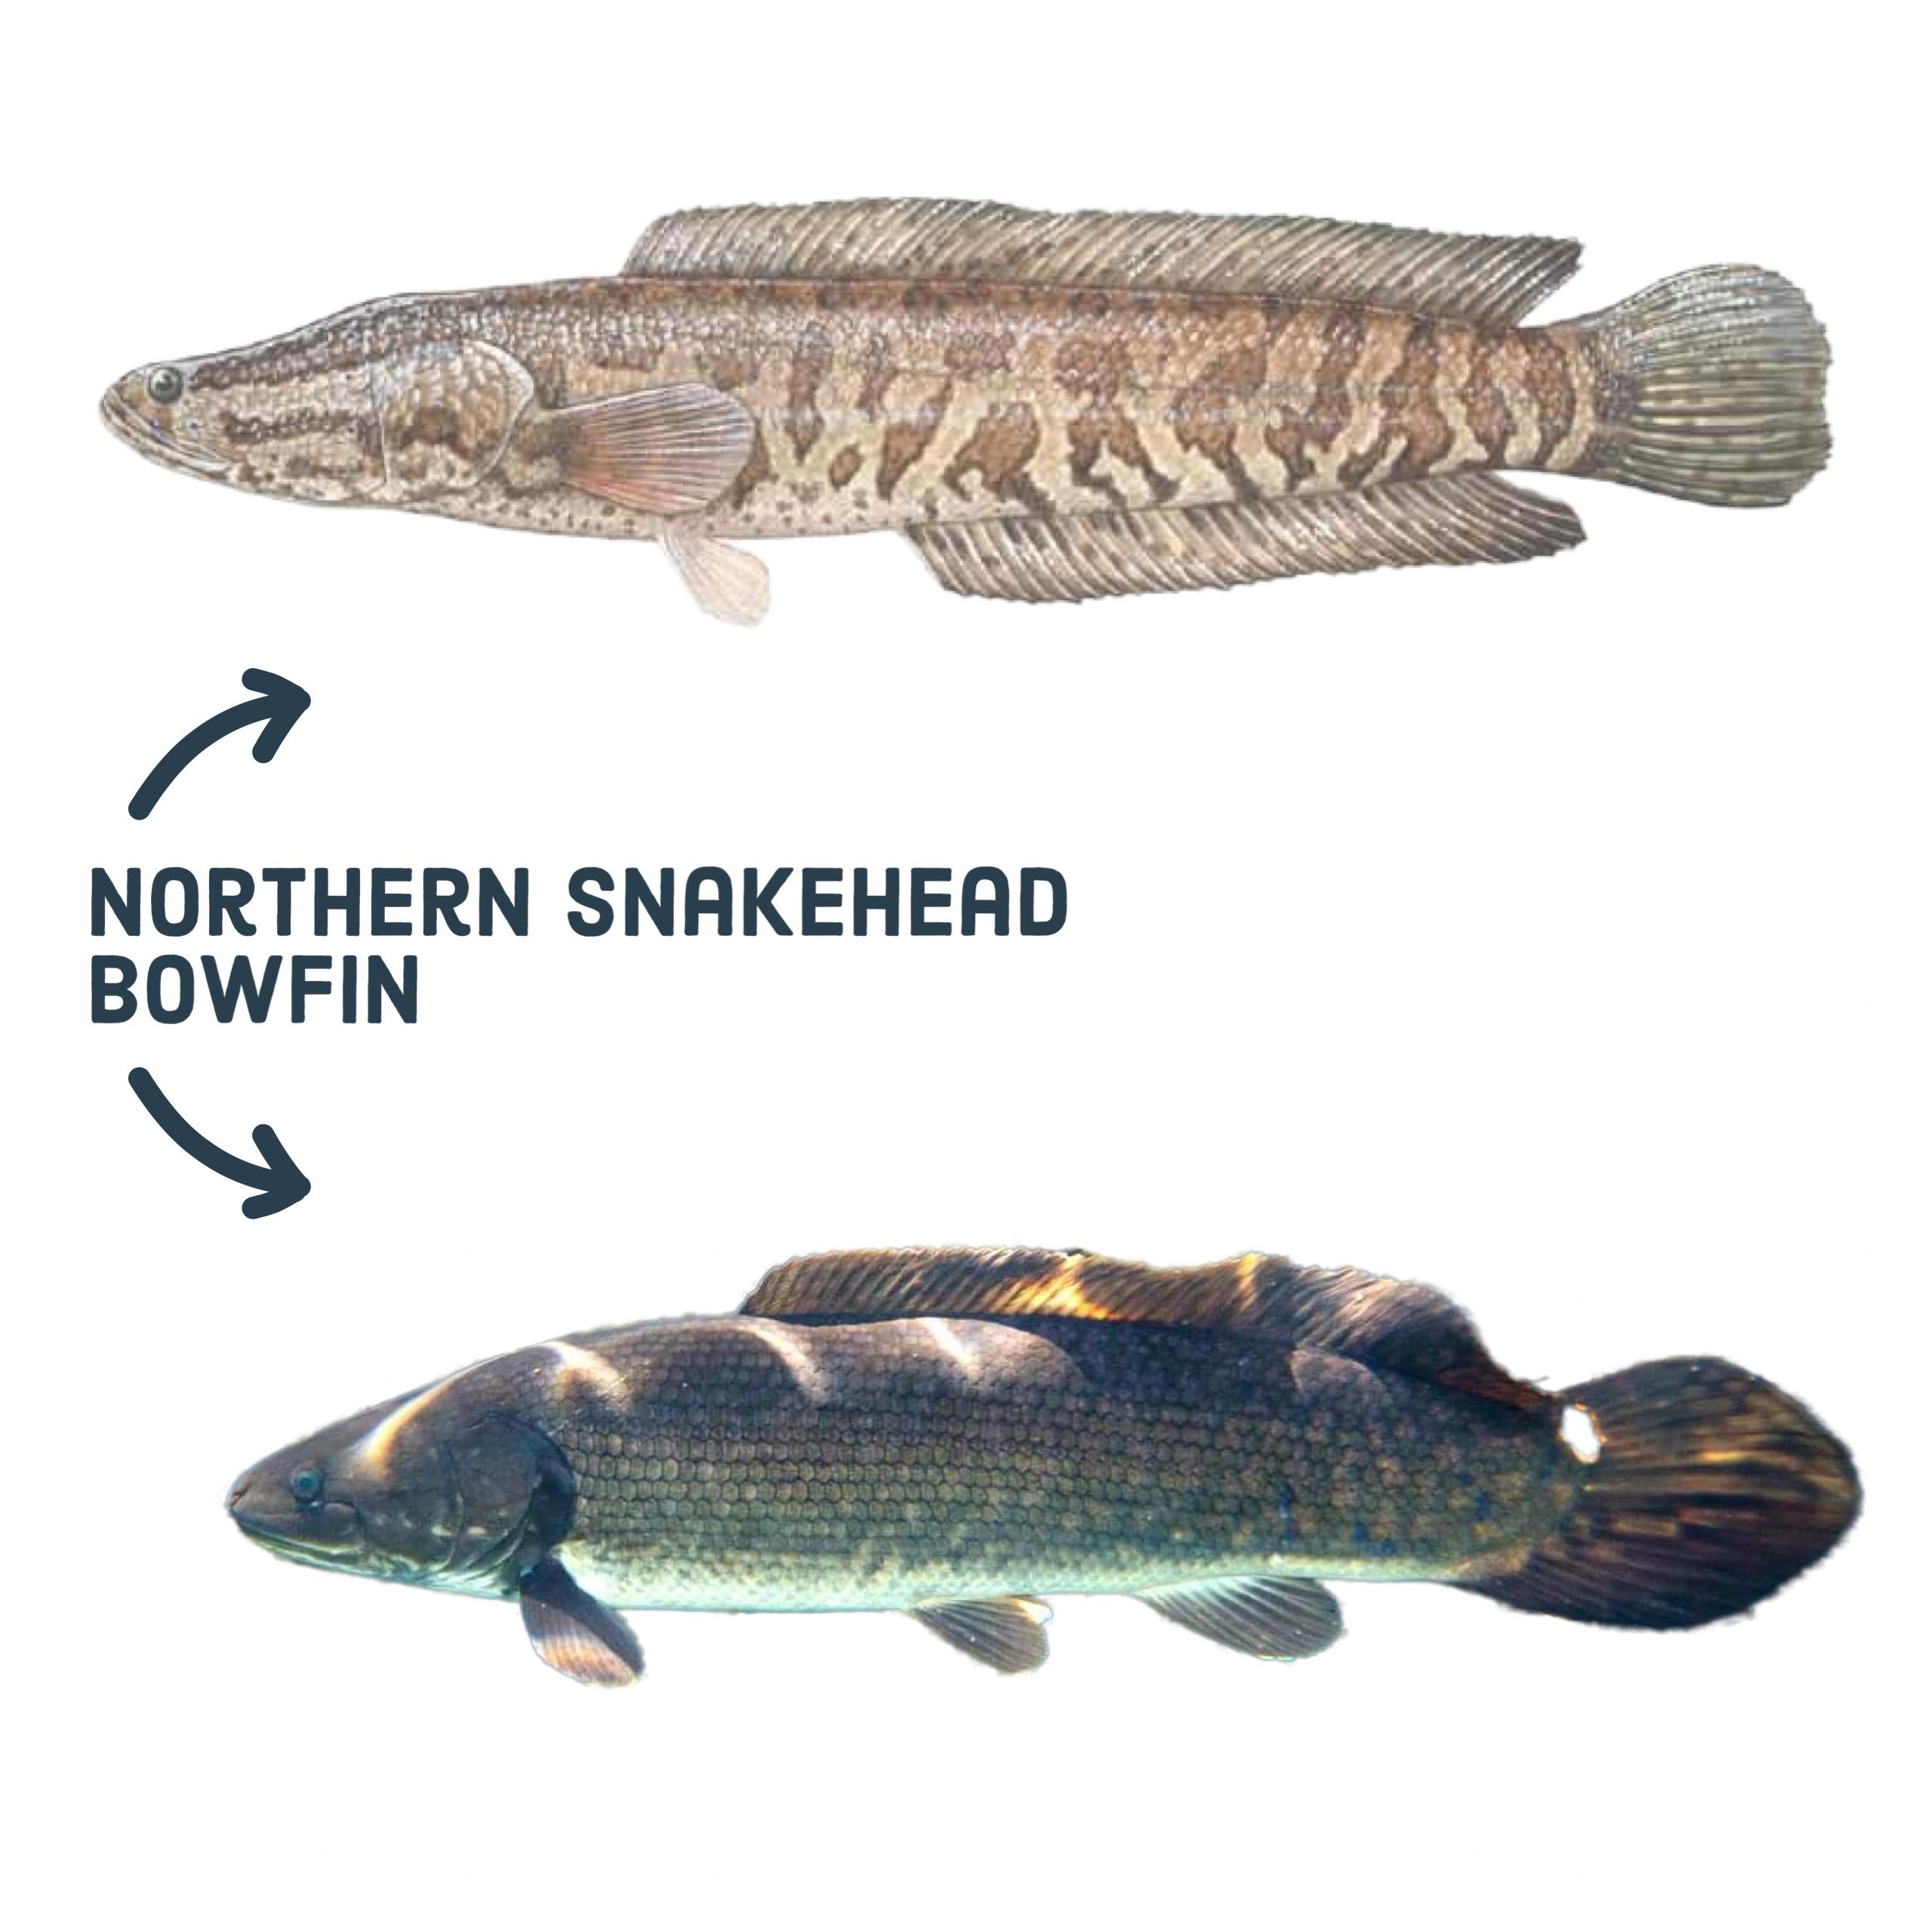 Bowfin and Northern Snakehead